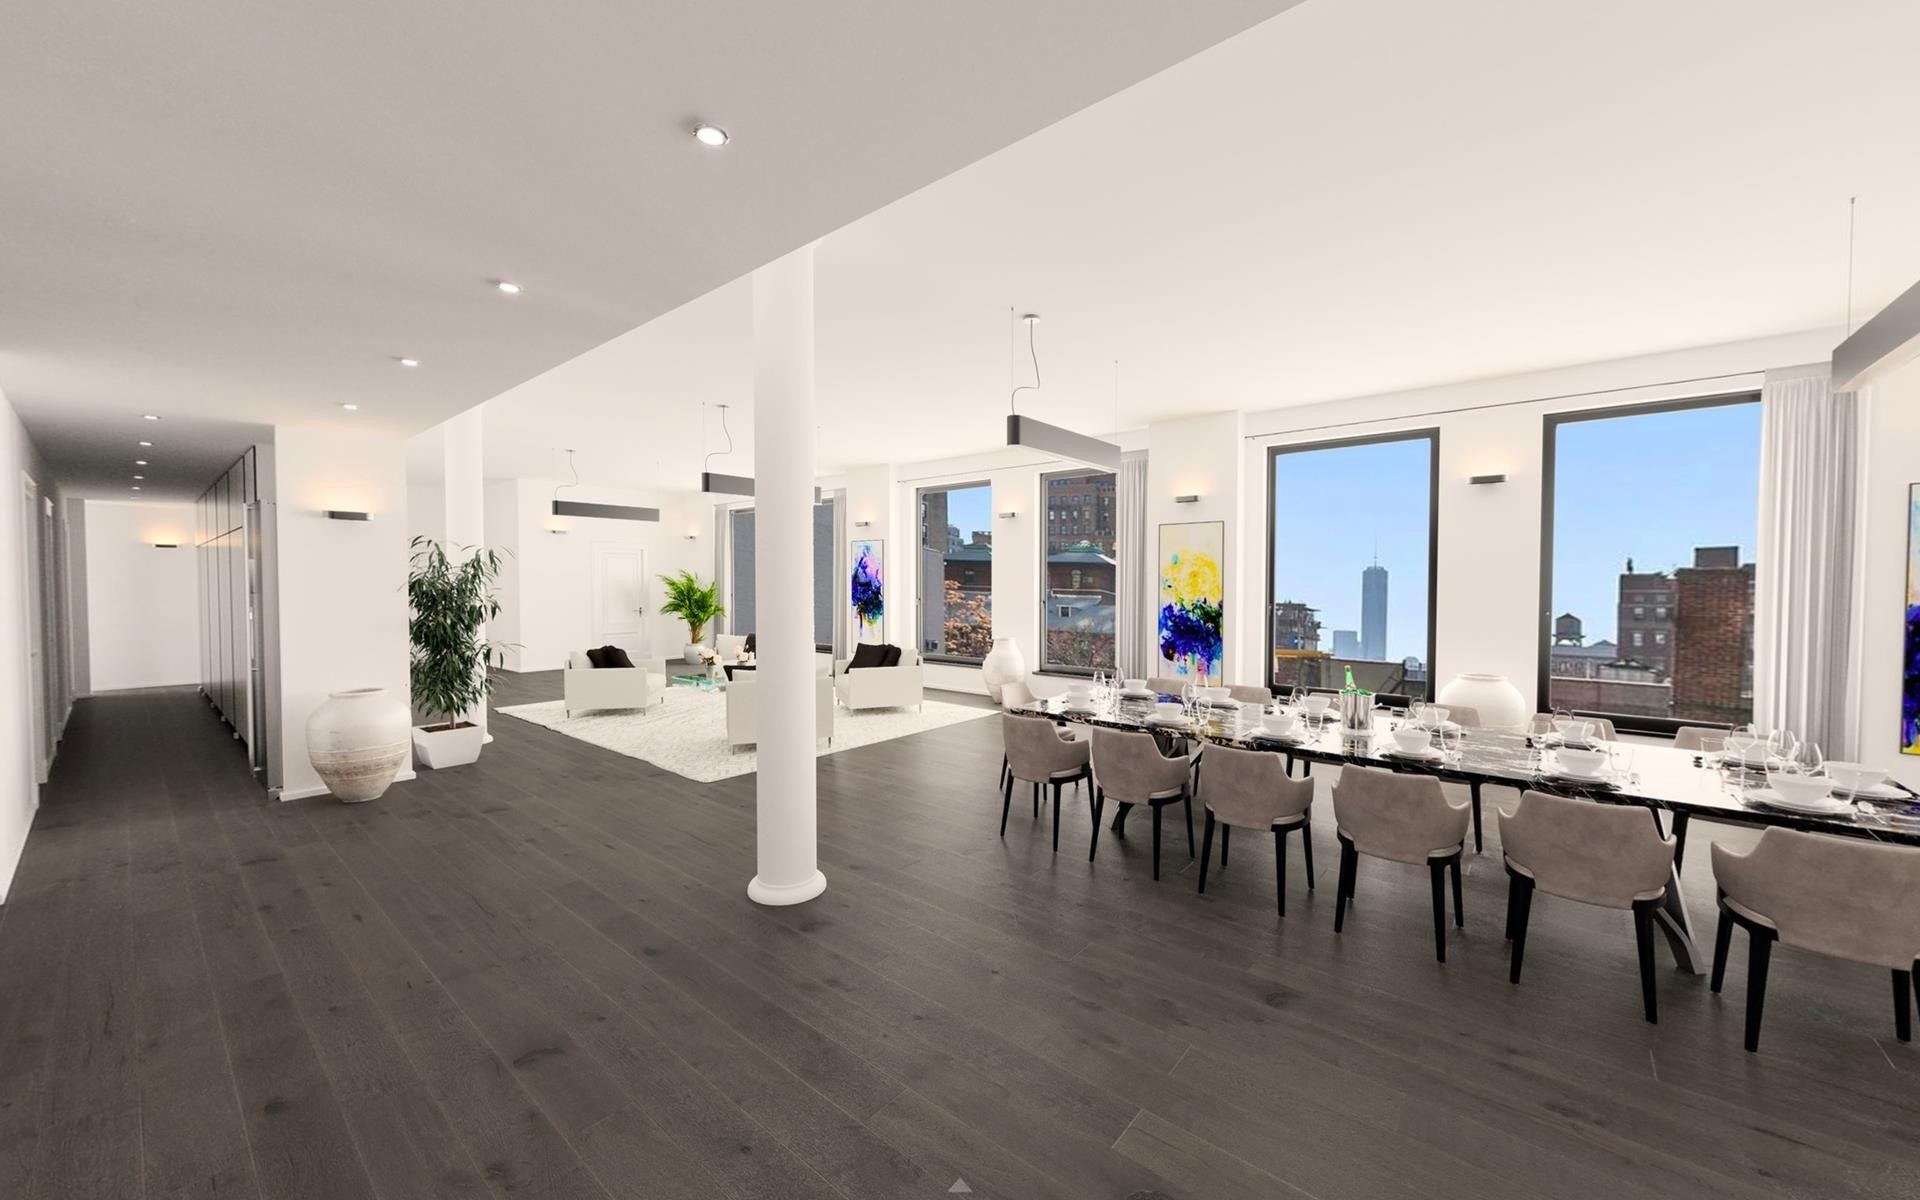 Co-op Properties for Sale at 227 W 17TH ST, 5 Chelsea, New York, New York 10011